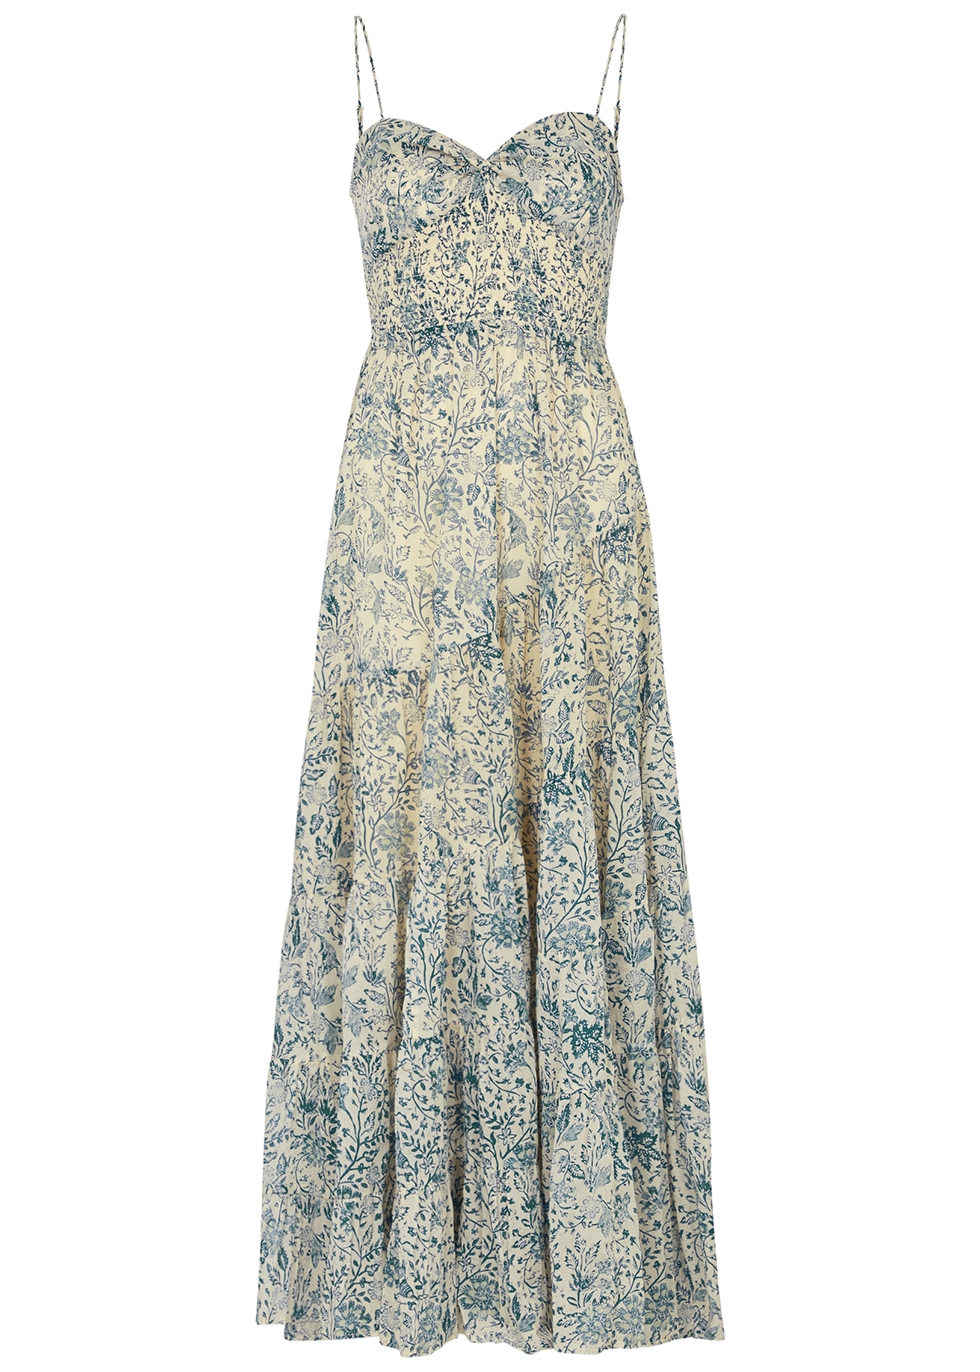 Free People Sundrenched floral-print cotton maxi dress - Harvey Nichols